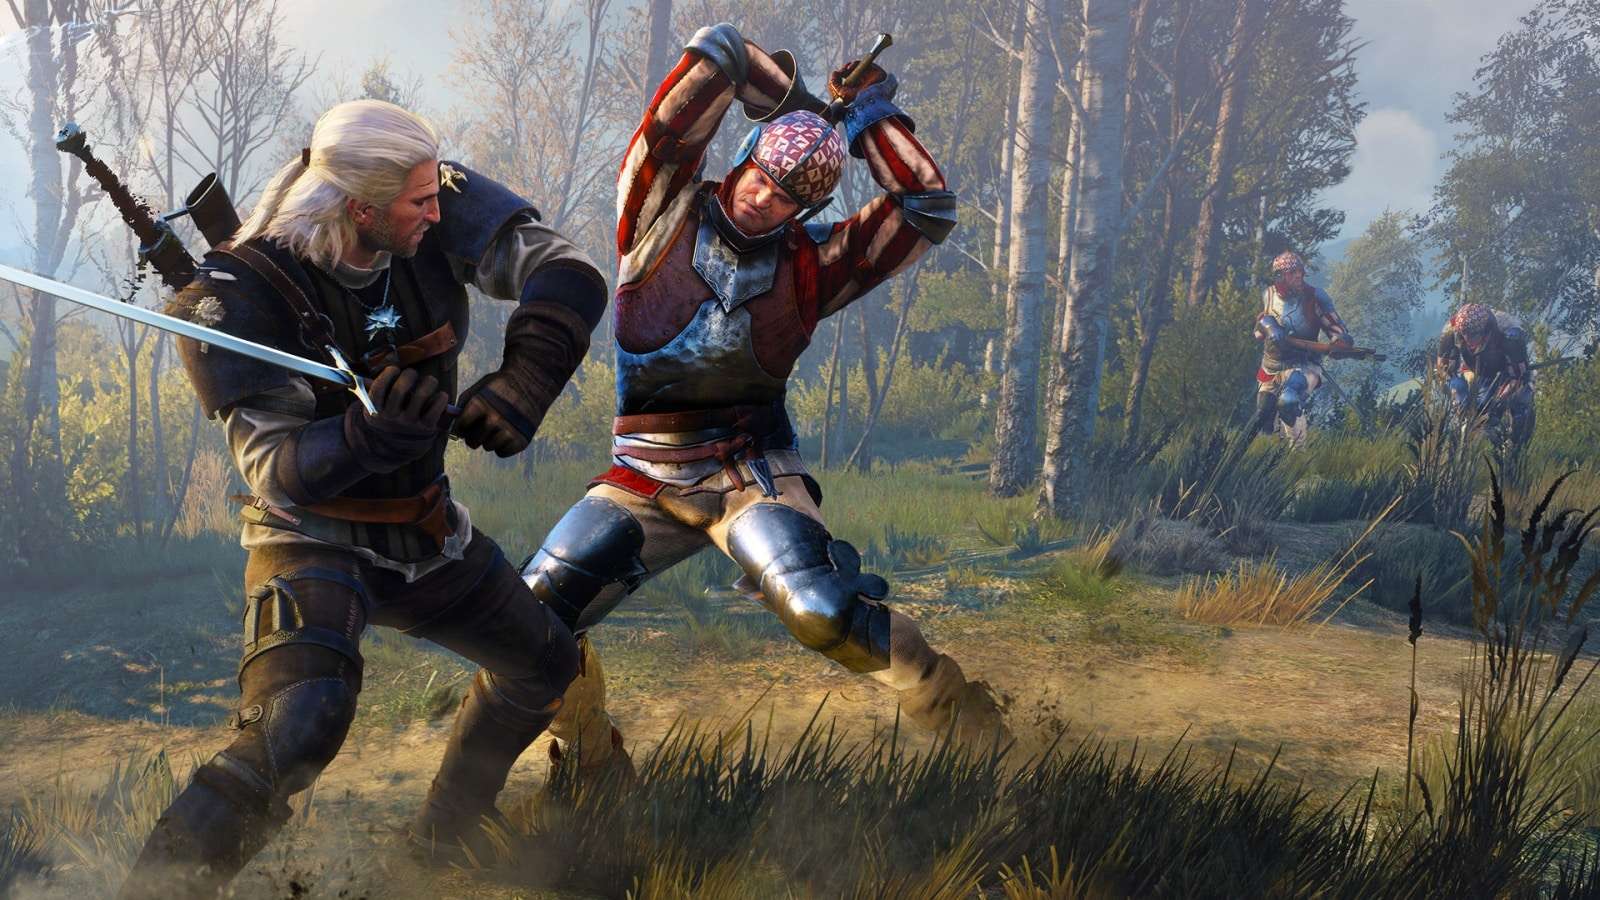 witcher multiplayer game may be in development